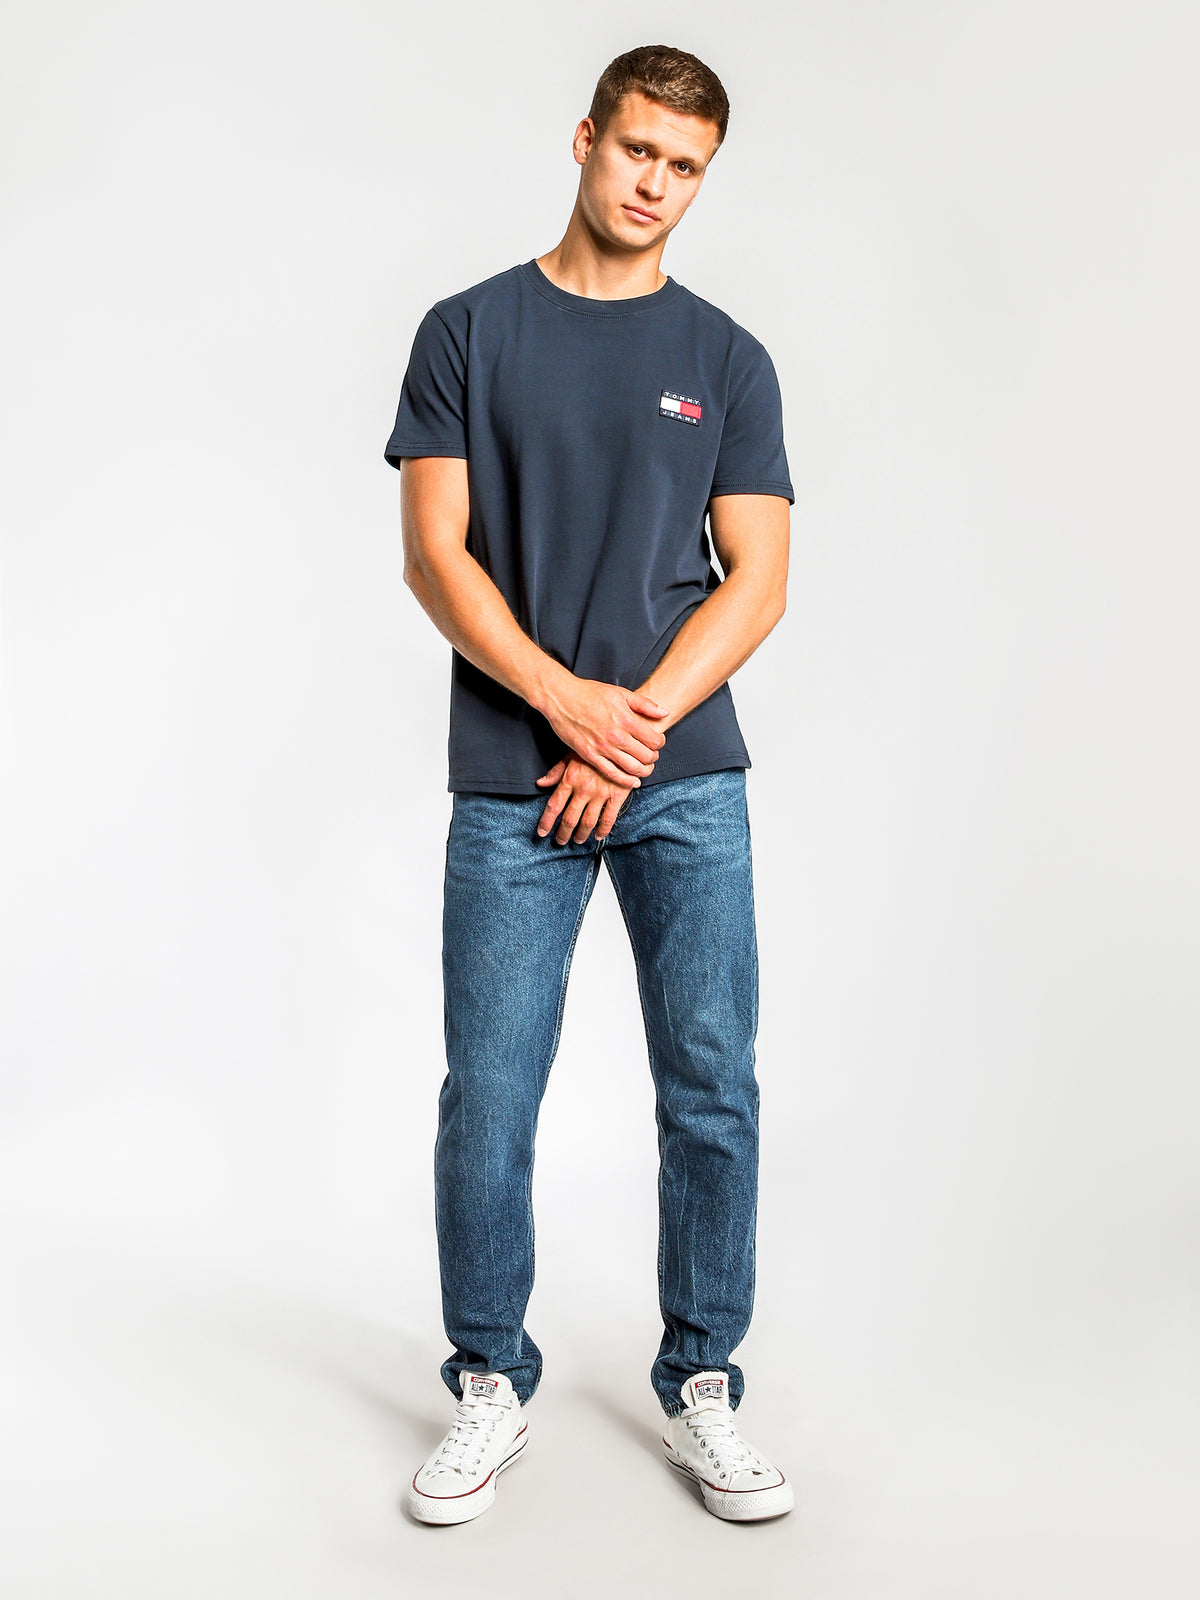 Tommy Jeans Badge Short Sleeve T-Shirt in Navy